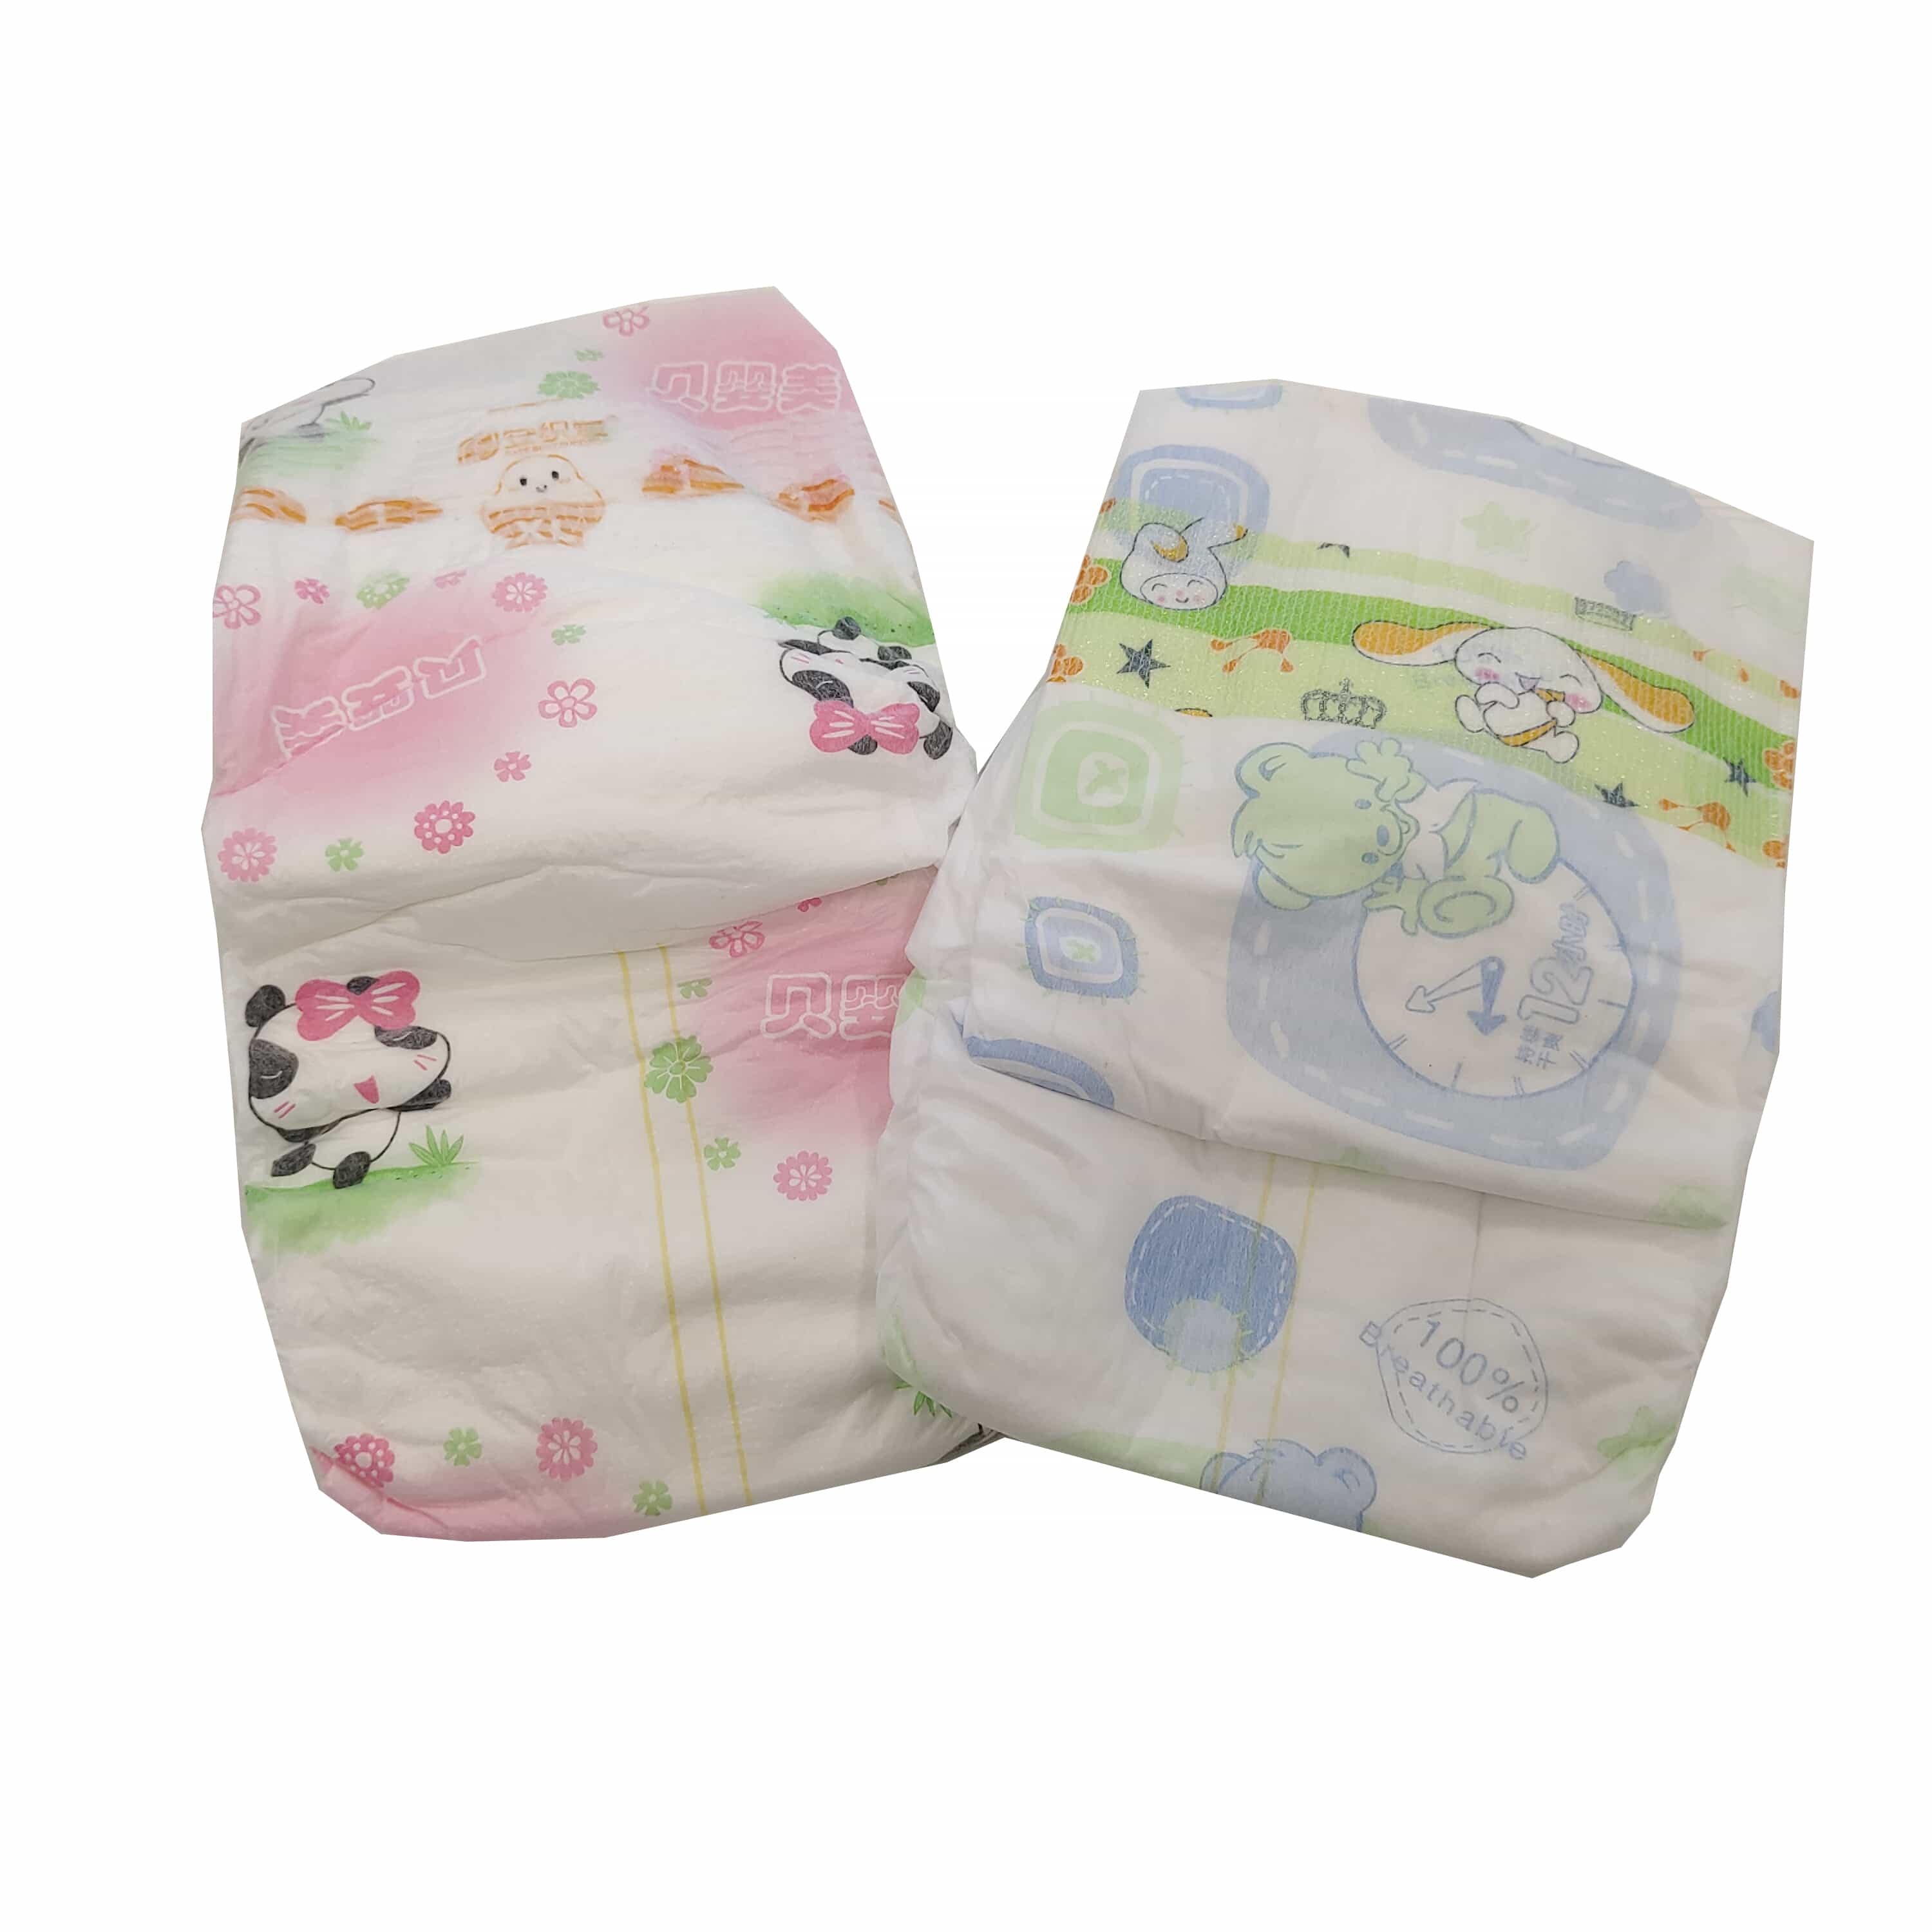 How to arrange baby diapers in day care centers?